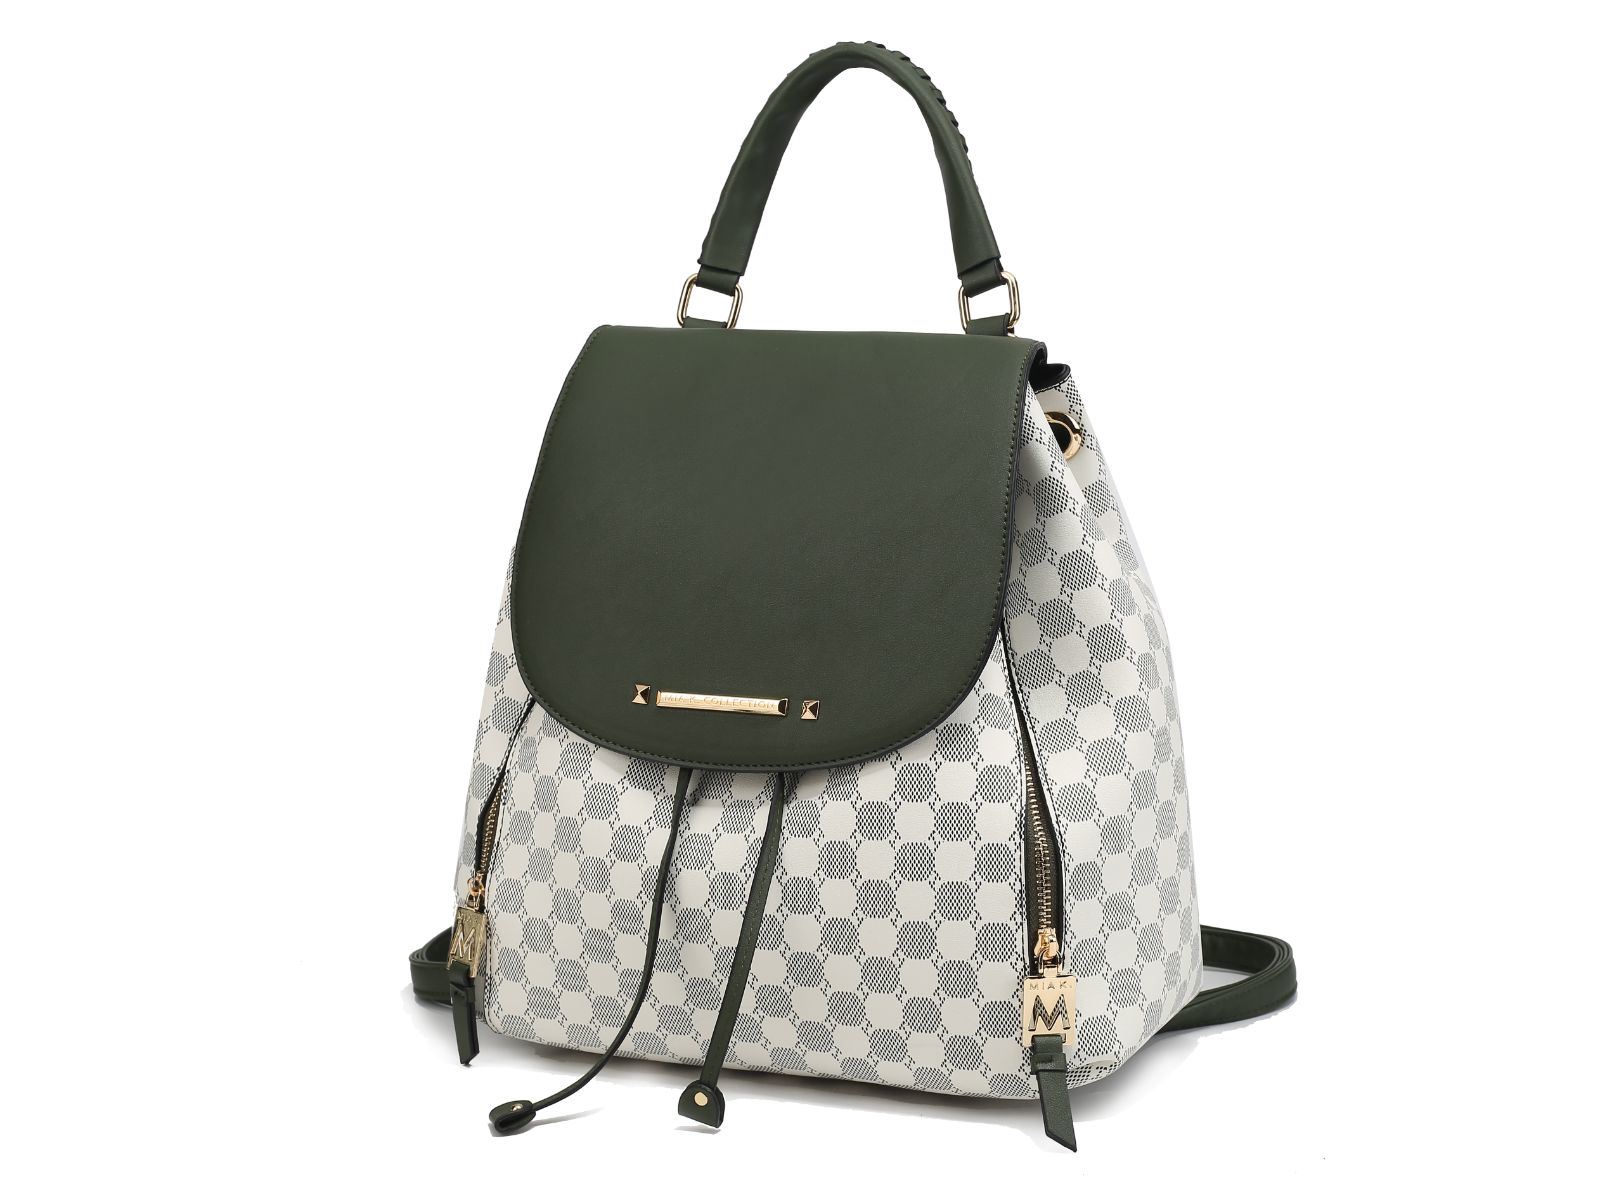 MKF Collection Kimberly Circular Print Backpack by Mia k in green and white.